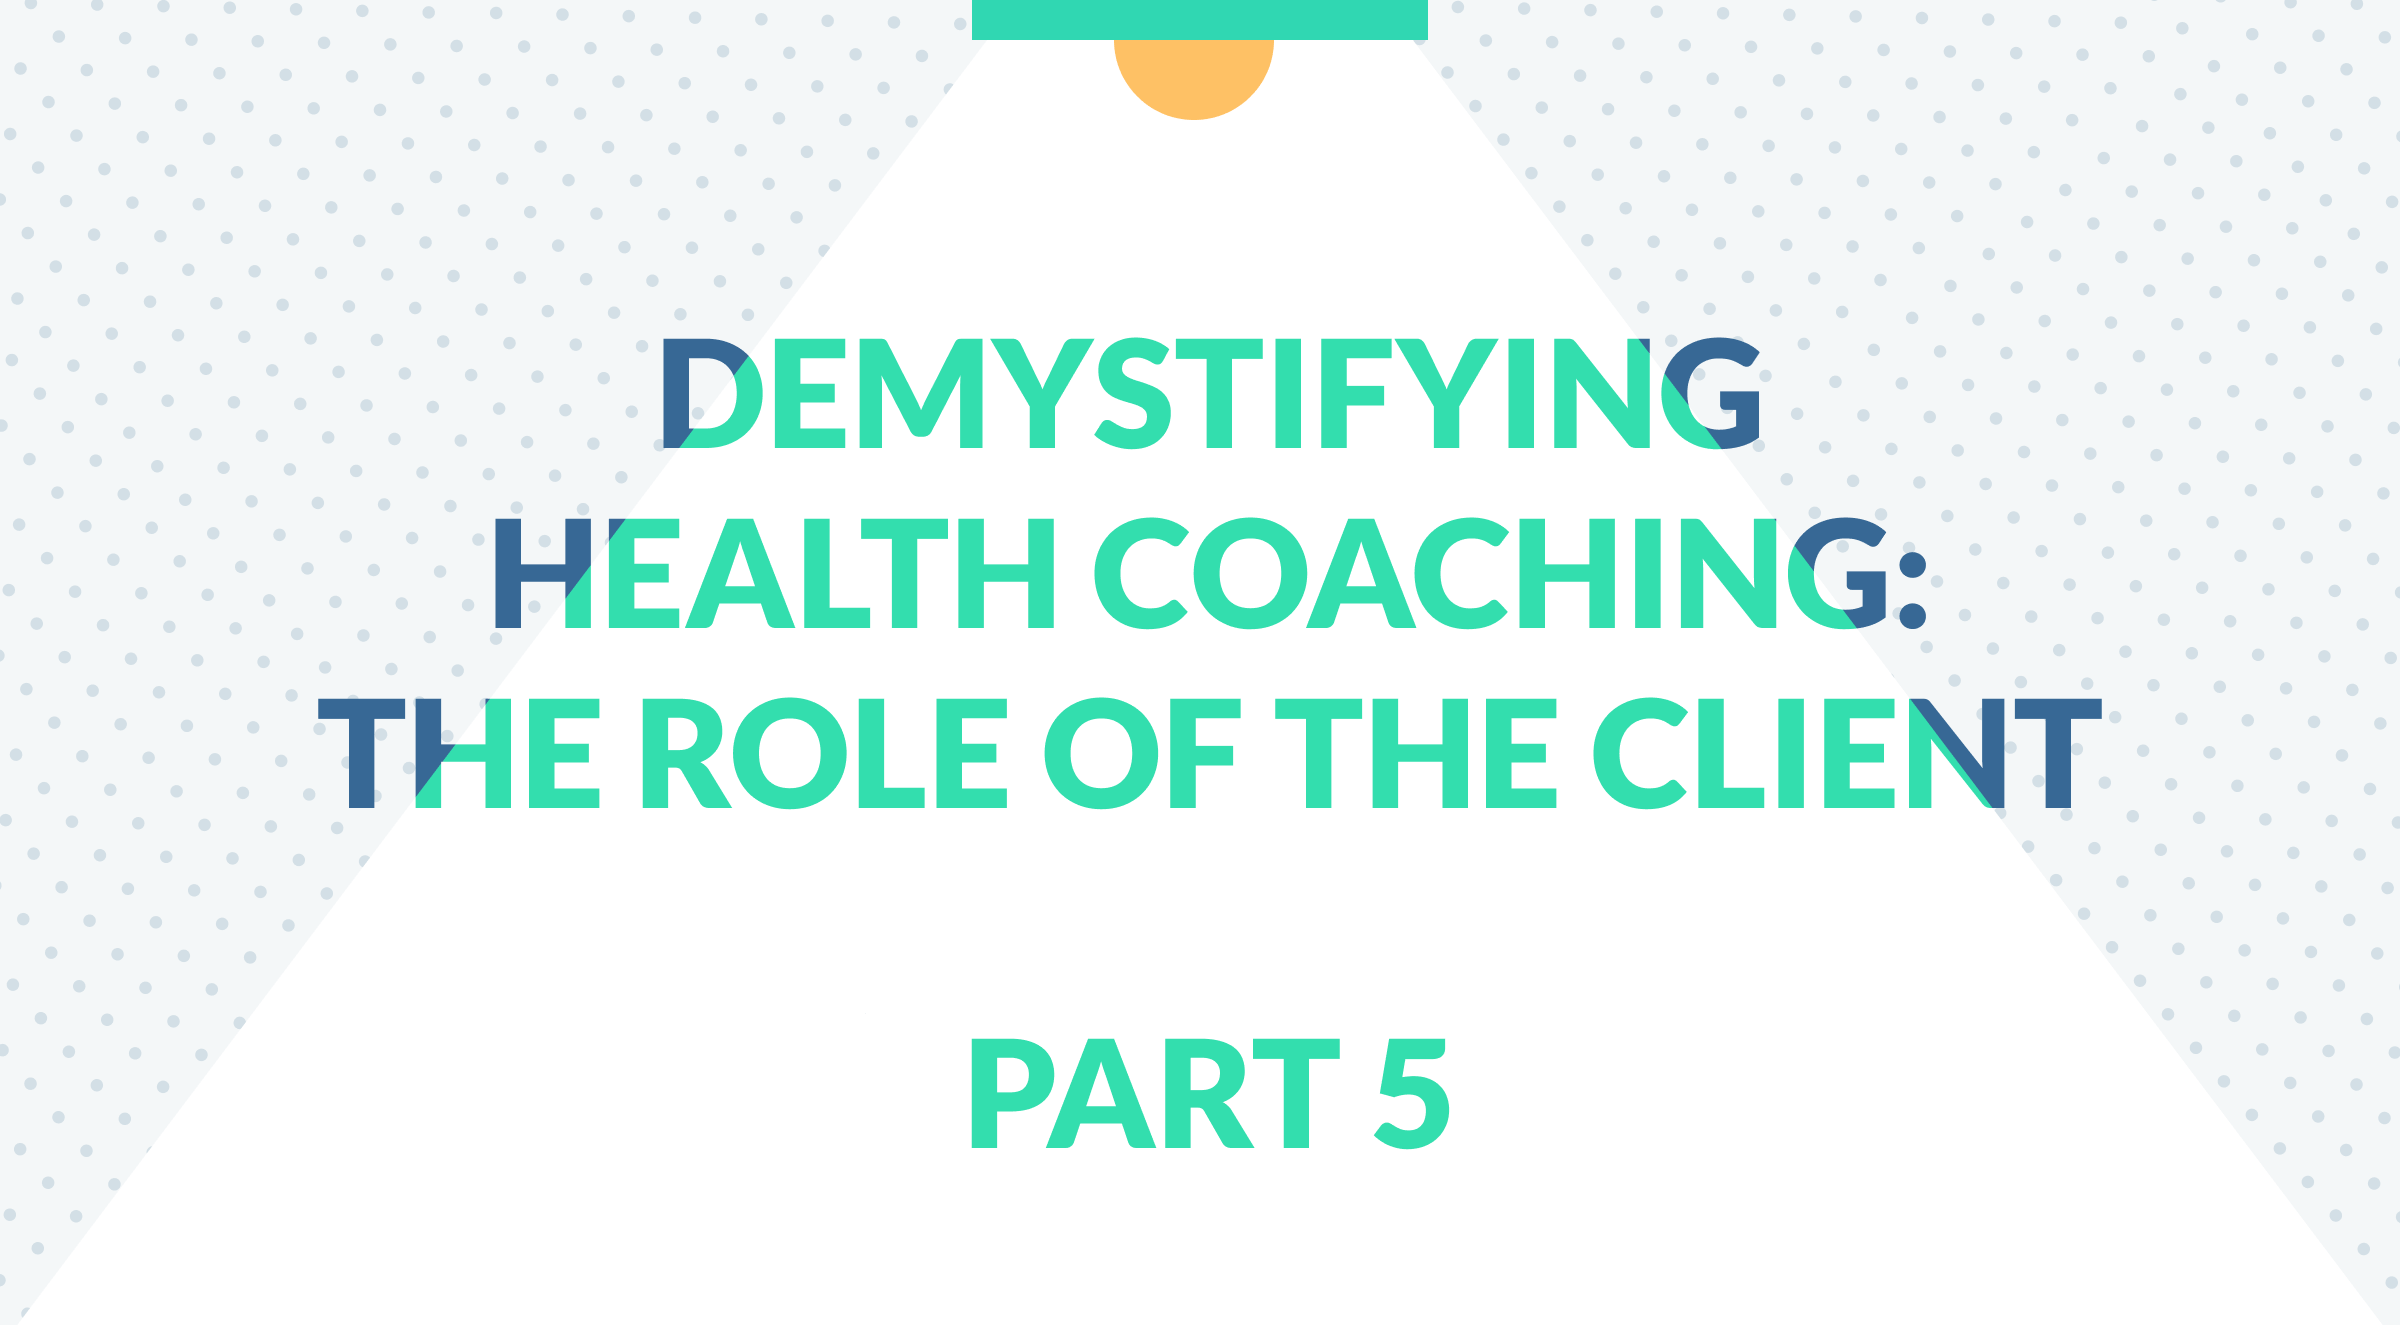 Demystifying Health Coaching The Role of the Client